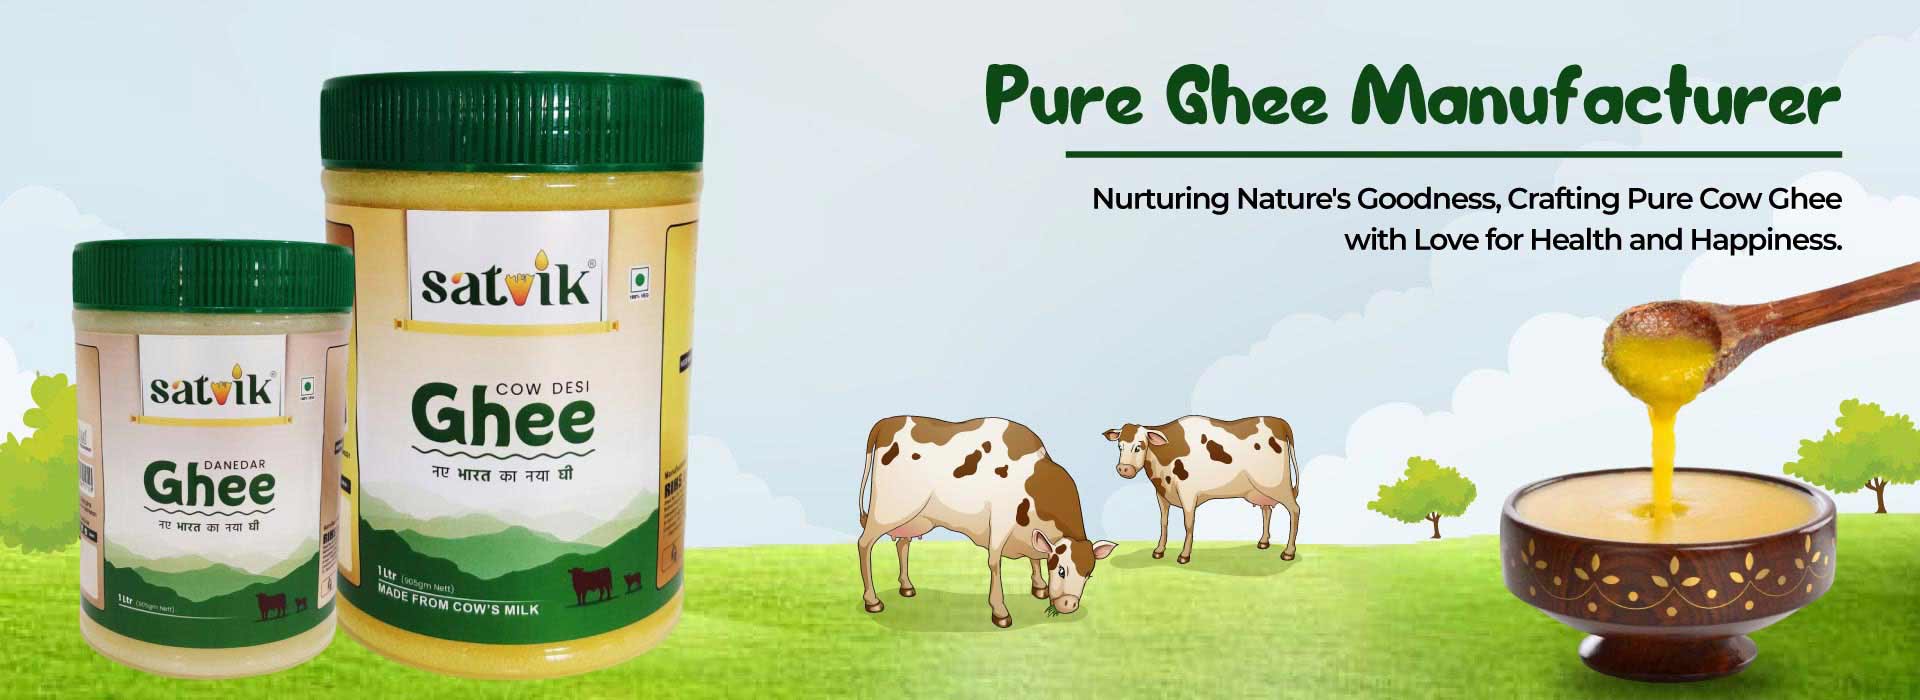 Pure Ghee Manufacturers in Ahmedabad